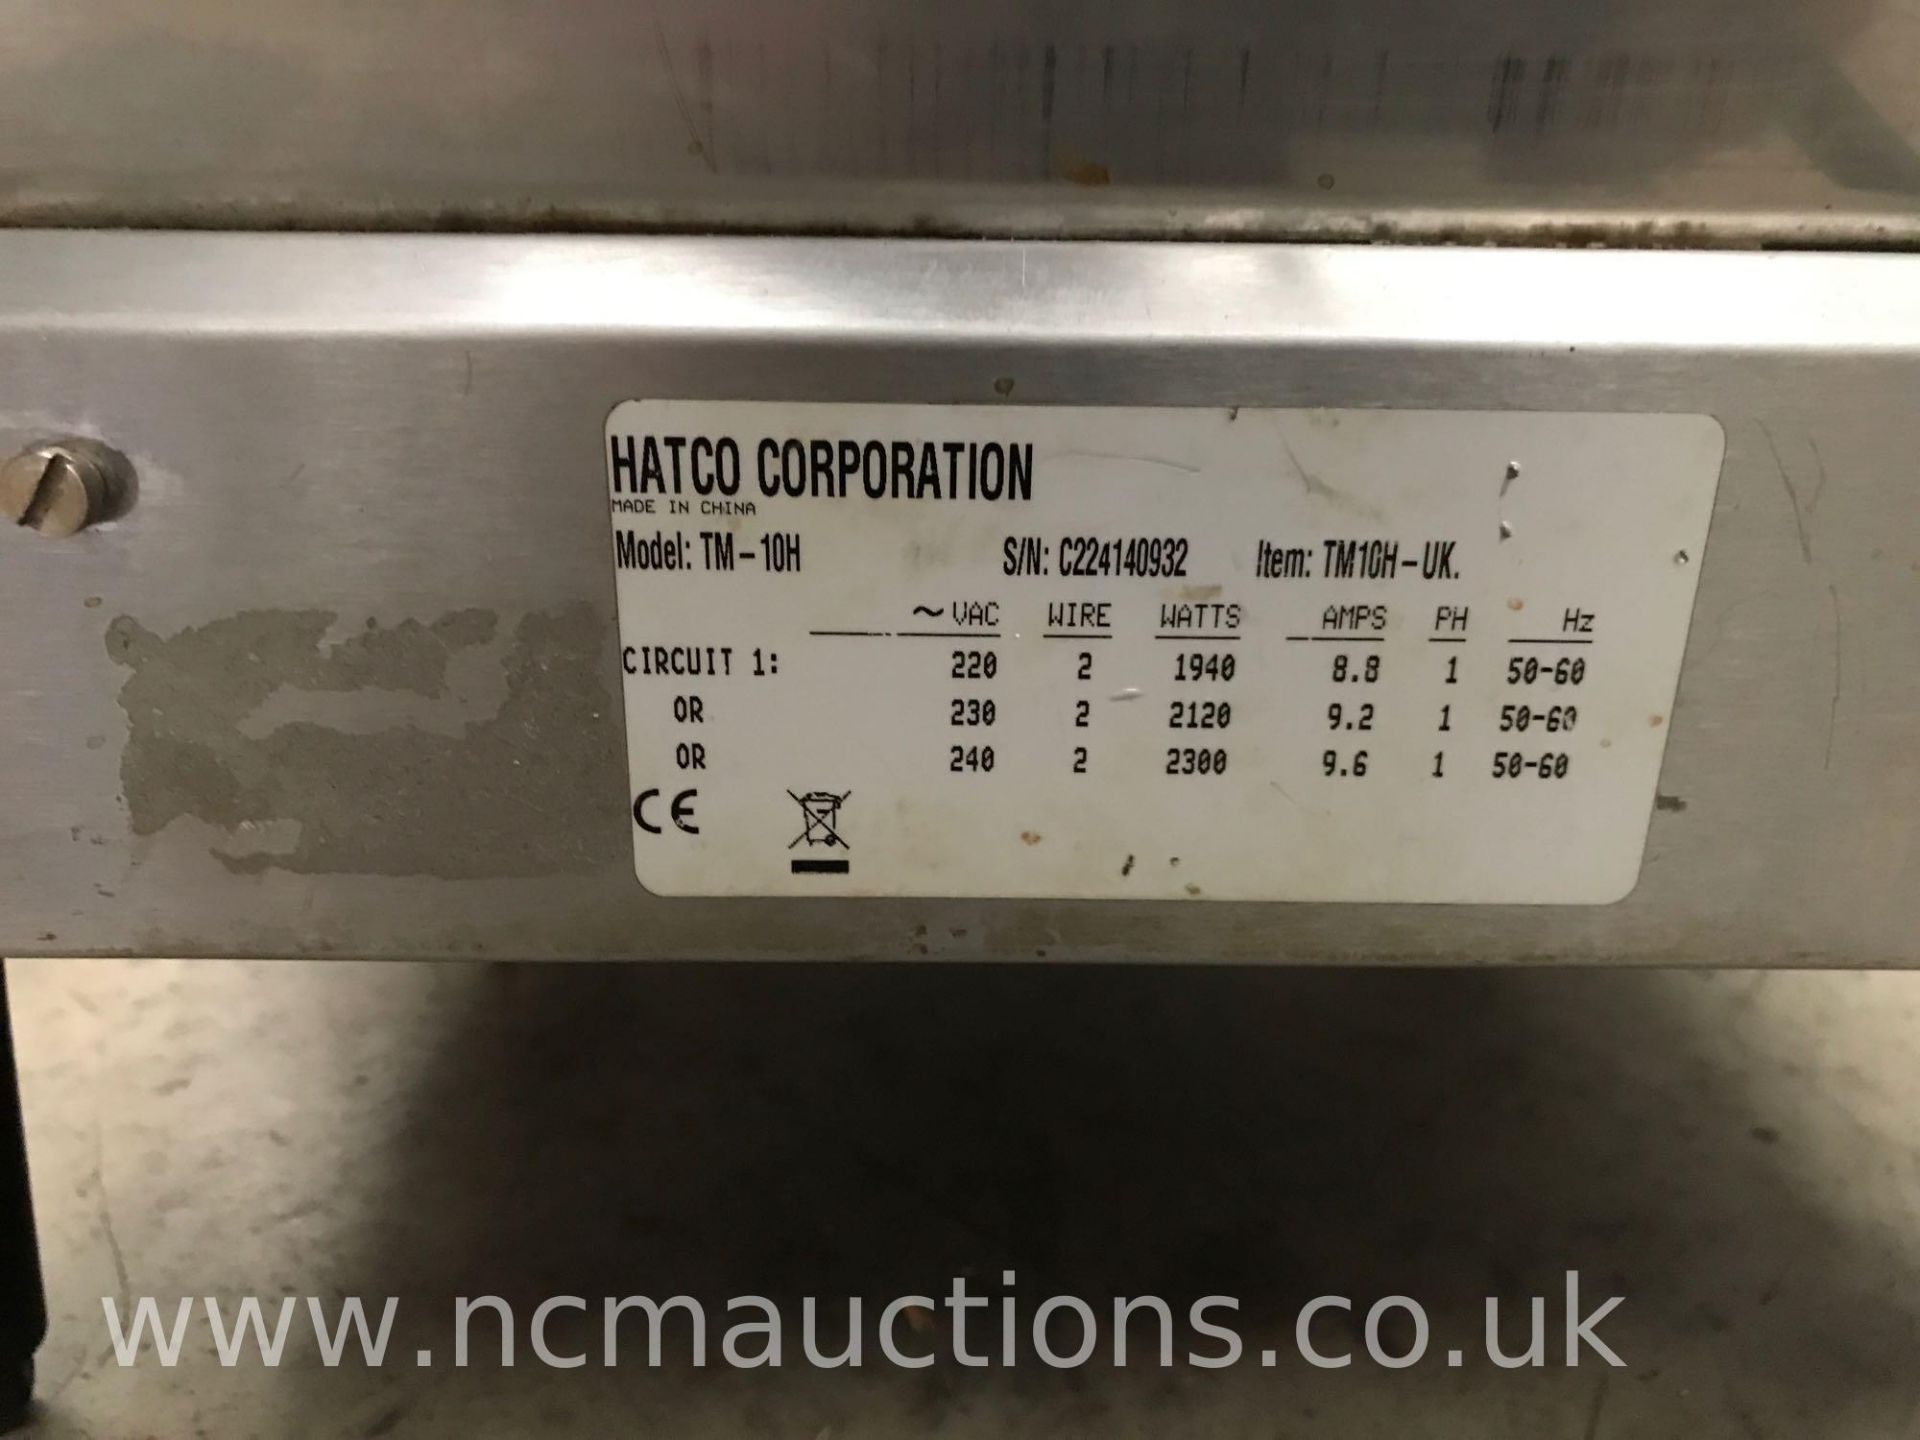 Hat Co-Tabletop Conveyor Toaster - Image 3 of 3